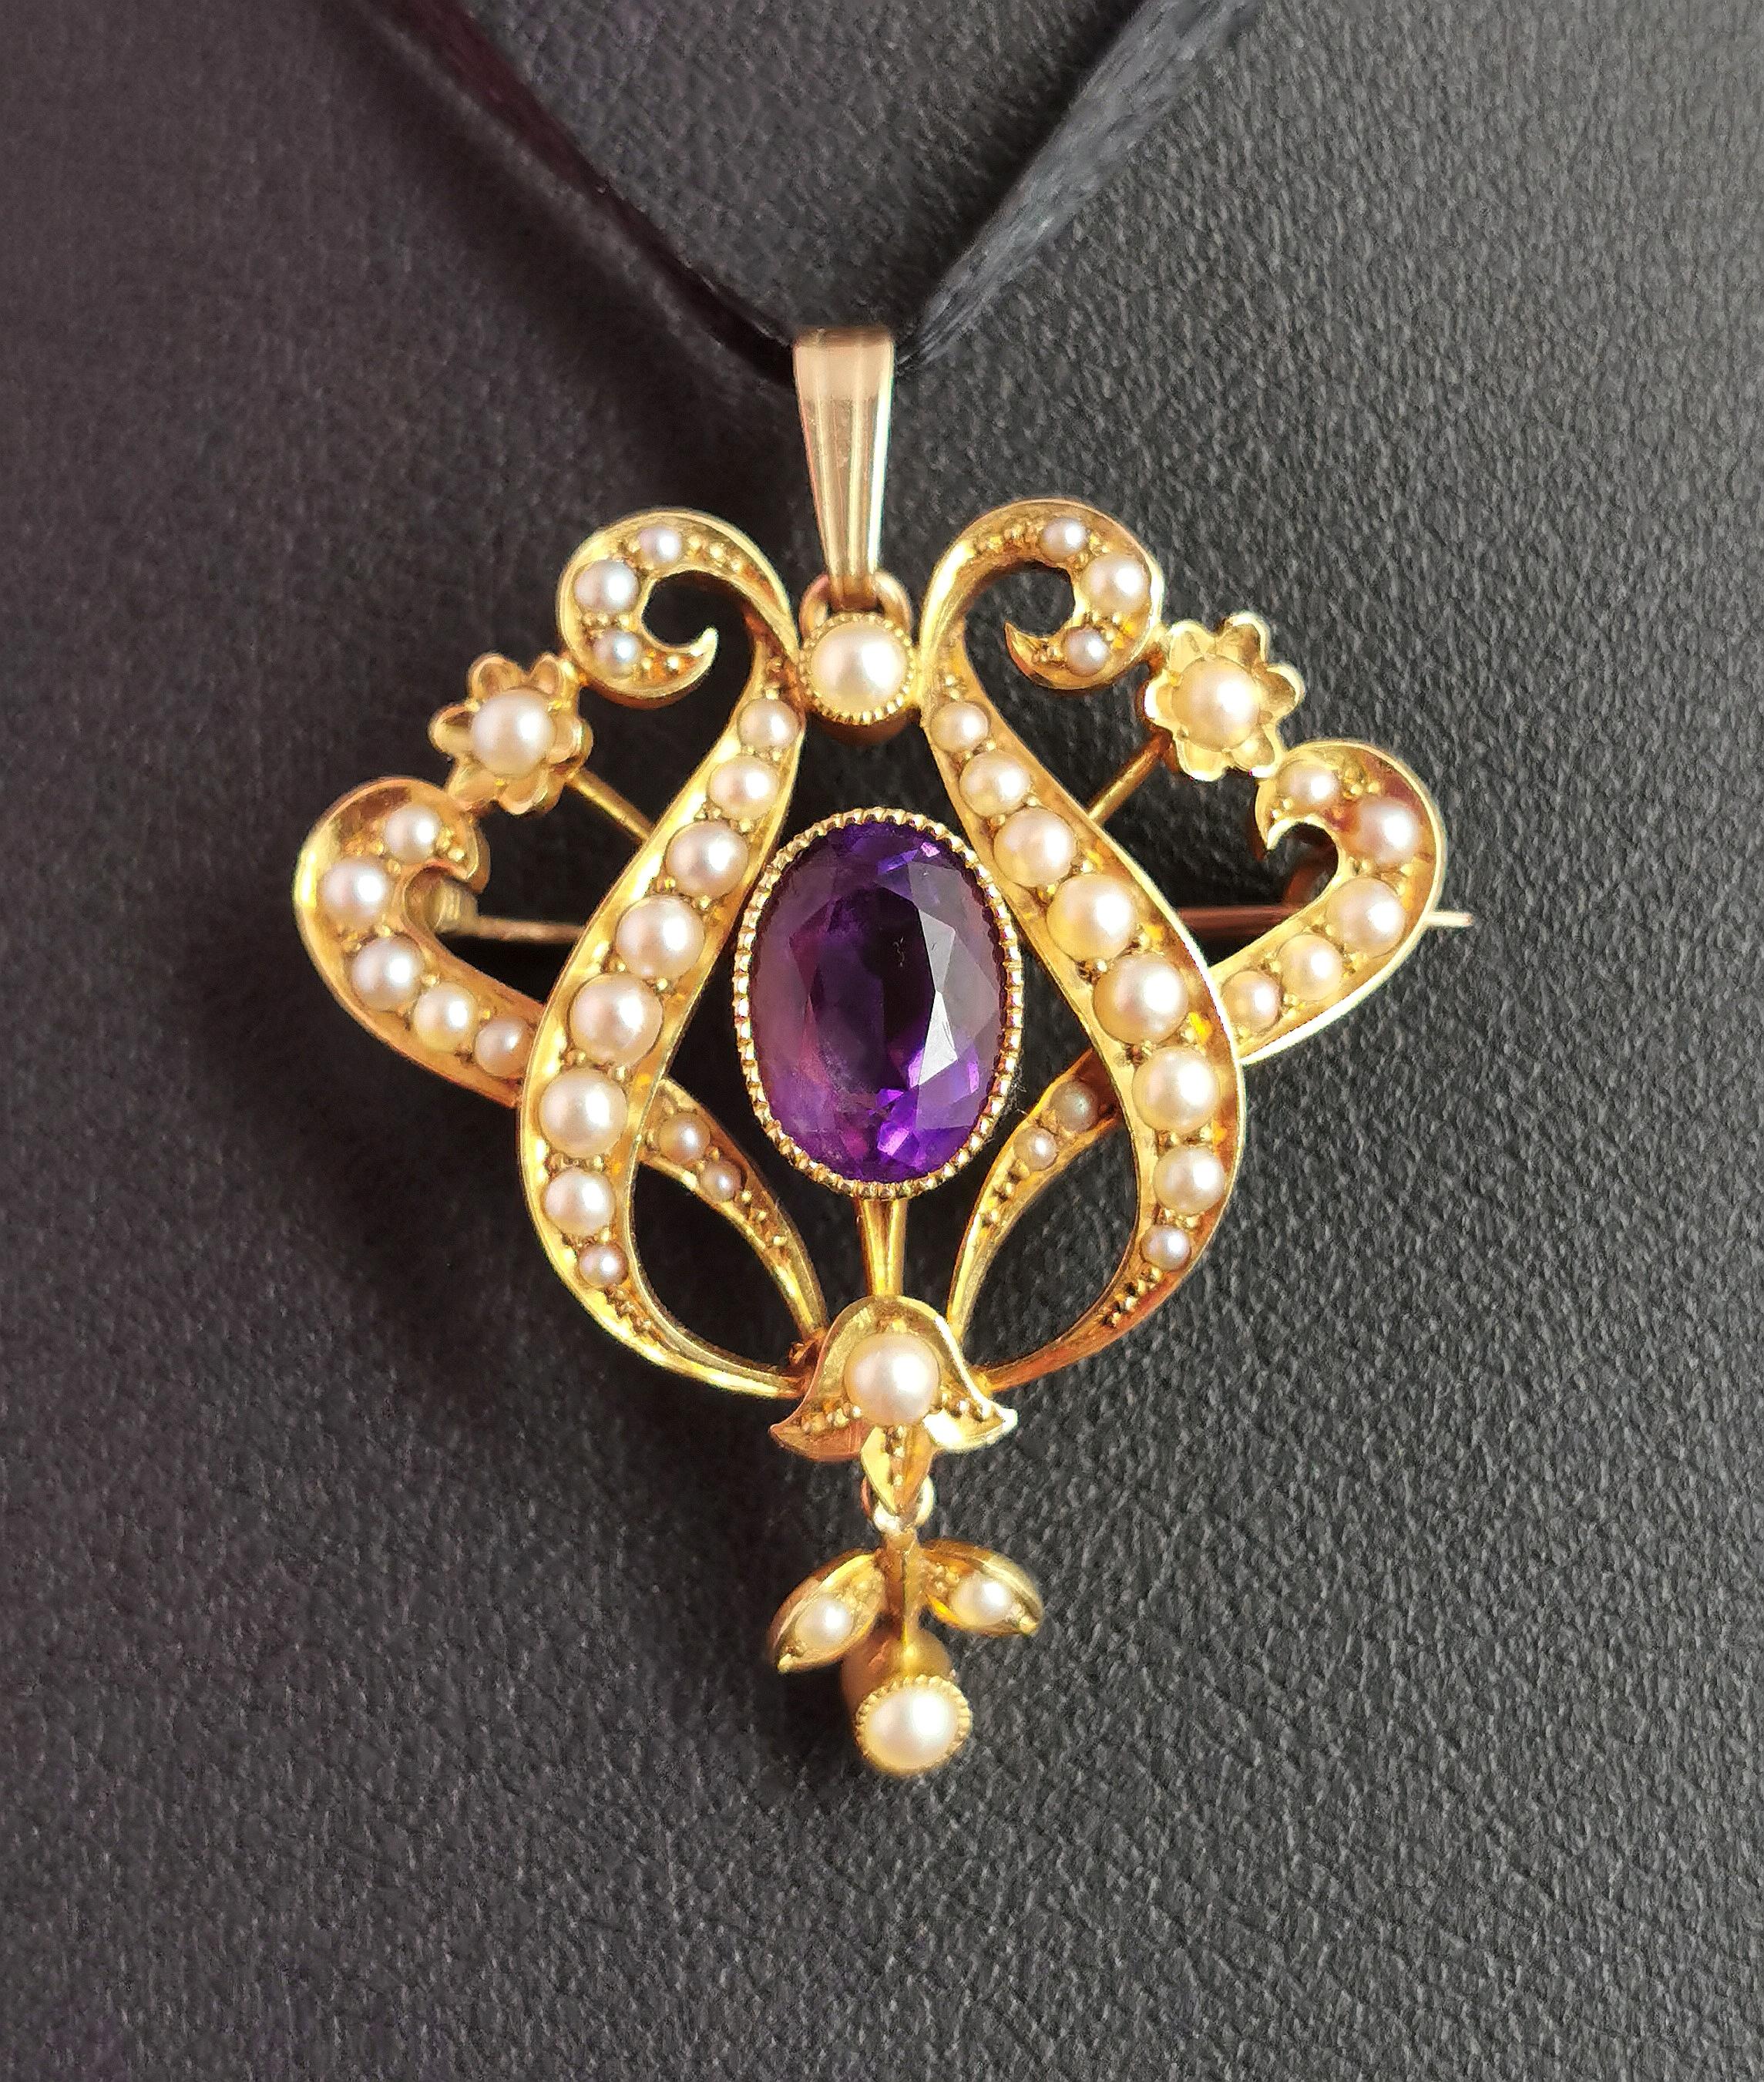 Antique Art Nouveau Amethyst and Pearl Pendant Brooch, 15kt Yellow Gold 3